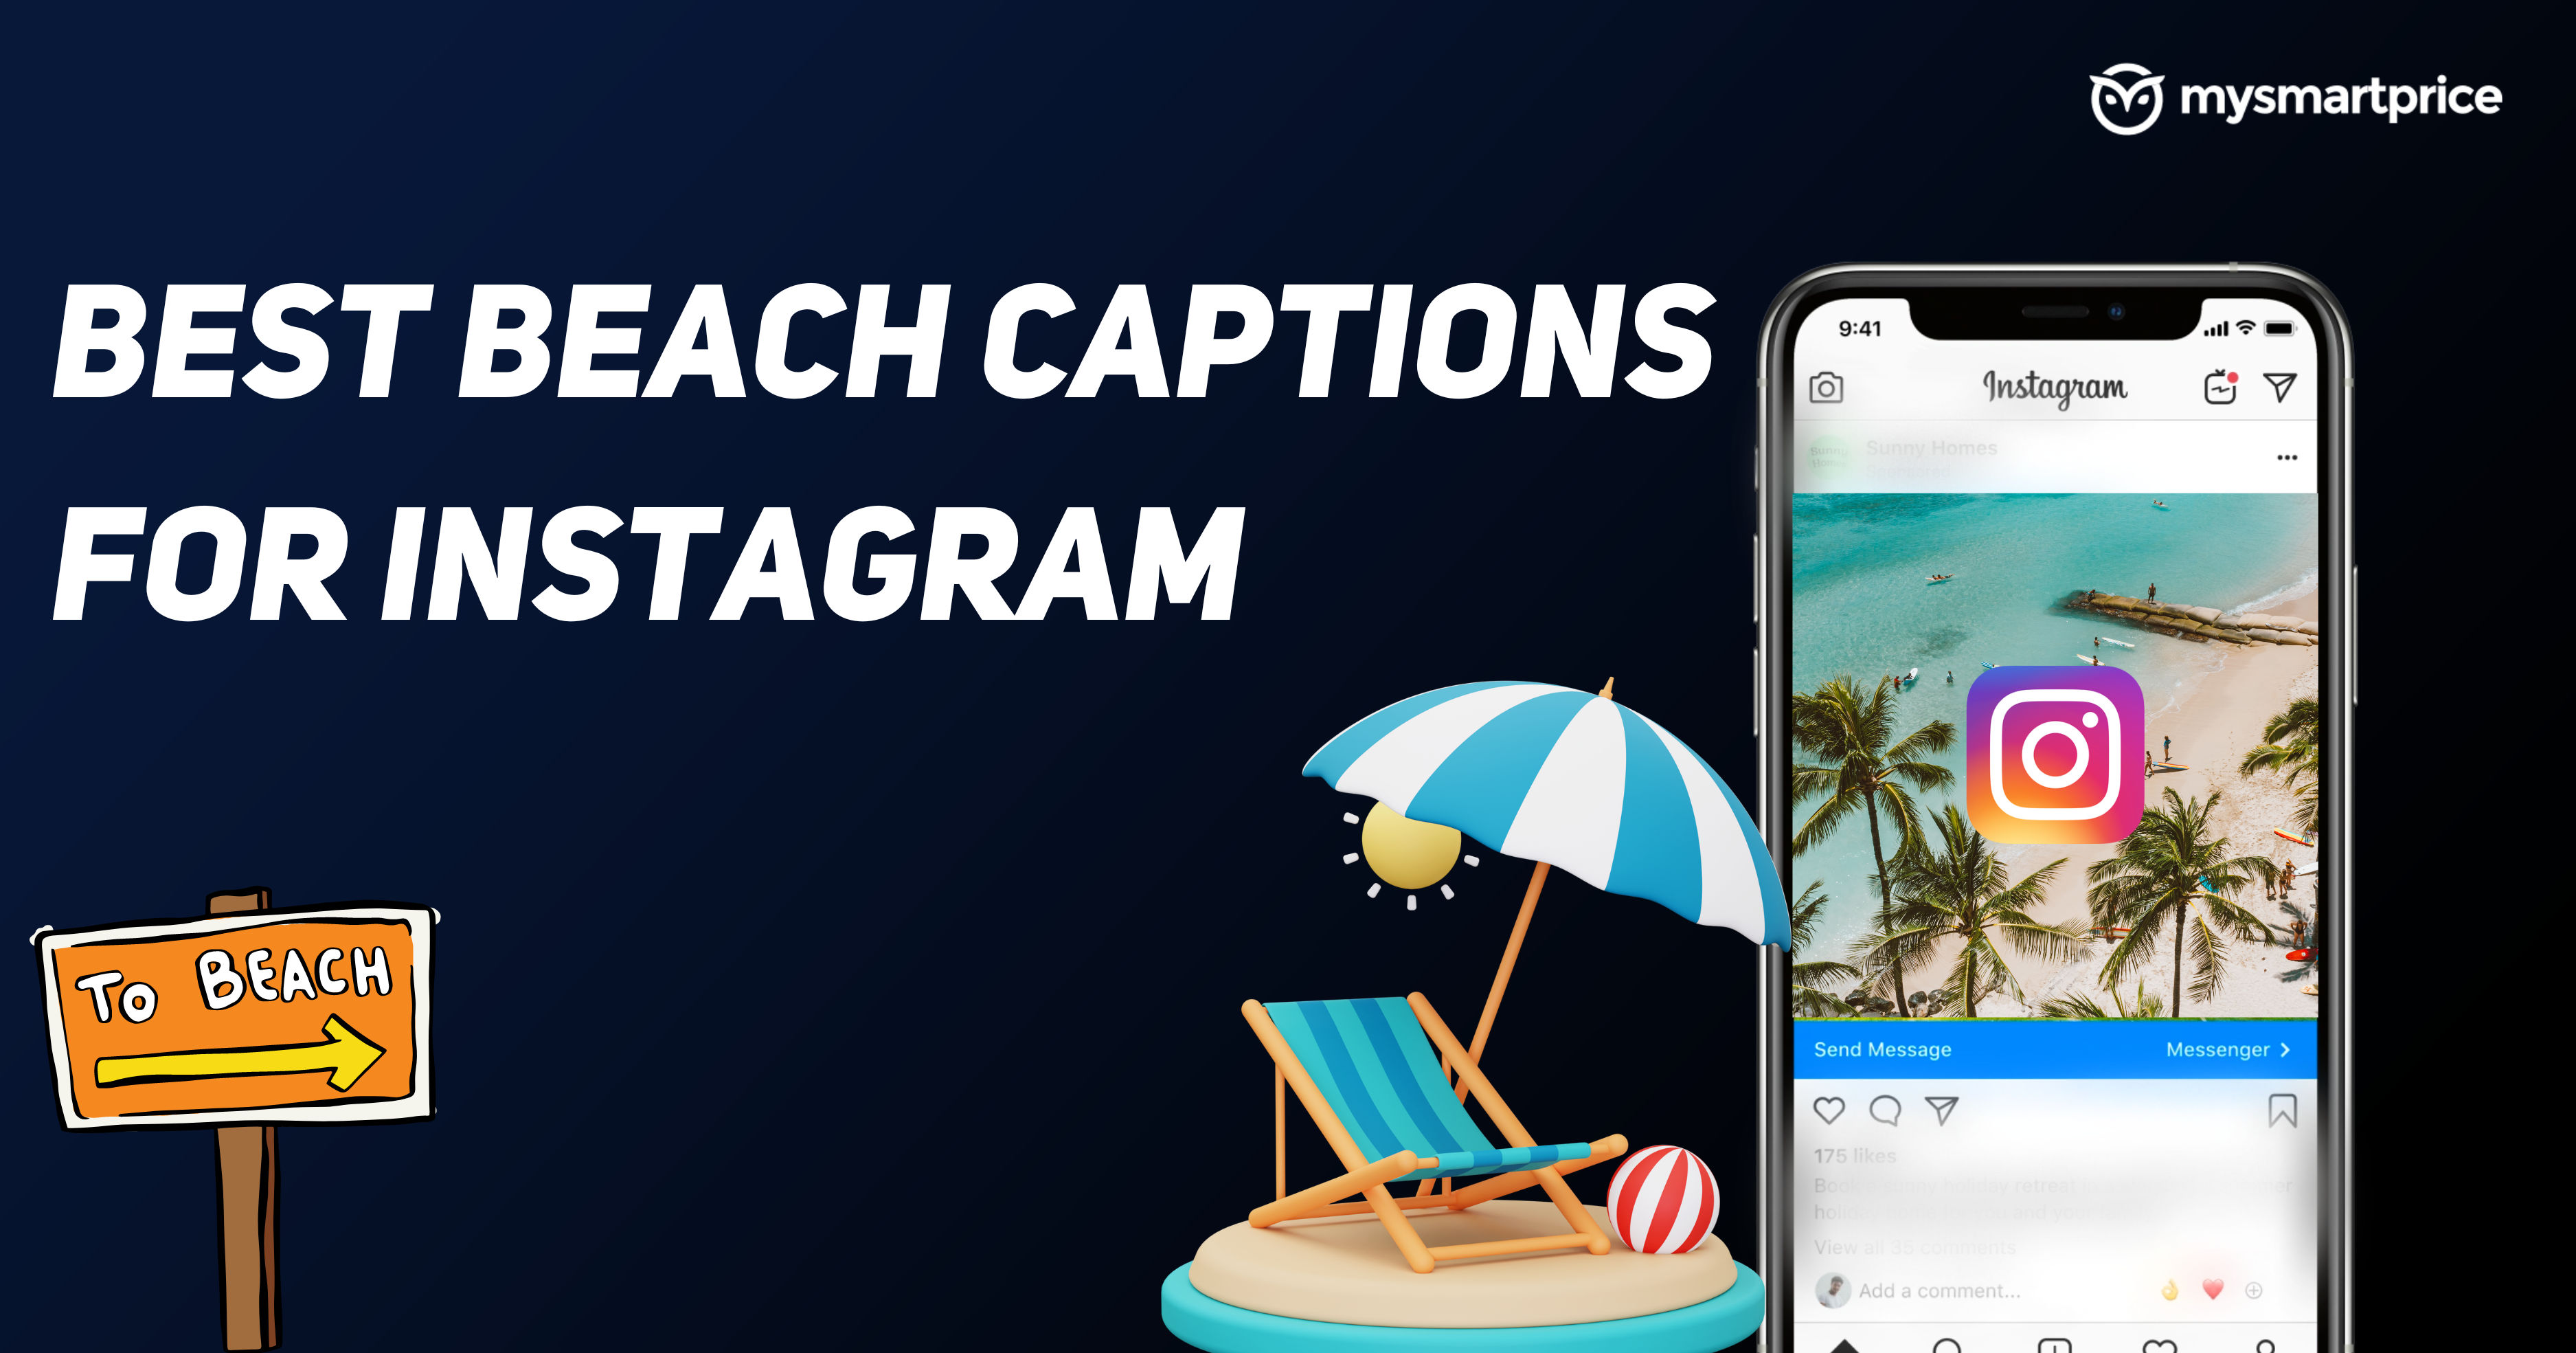 Beach Captions For Instagram: 200+ Cute, Funny, Inspirational, Short, and  Sassy Beach Captions/Quotes For Instagram - MySmartPrice